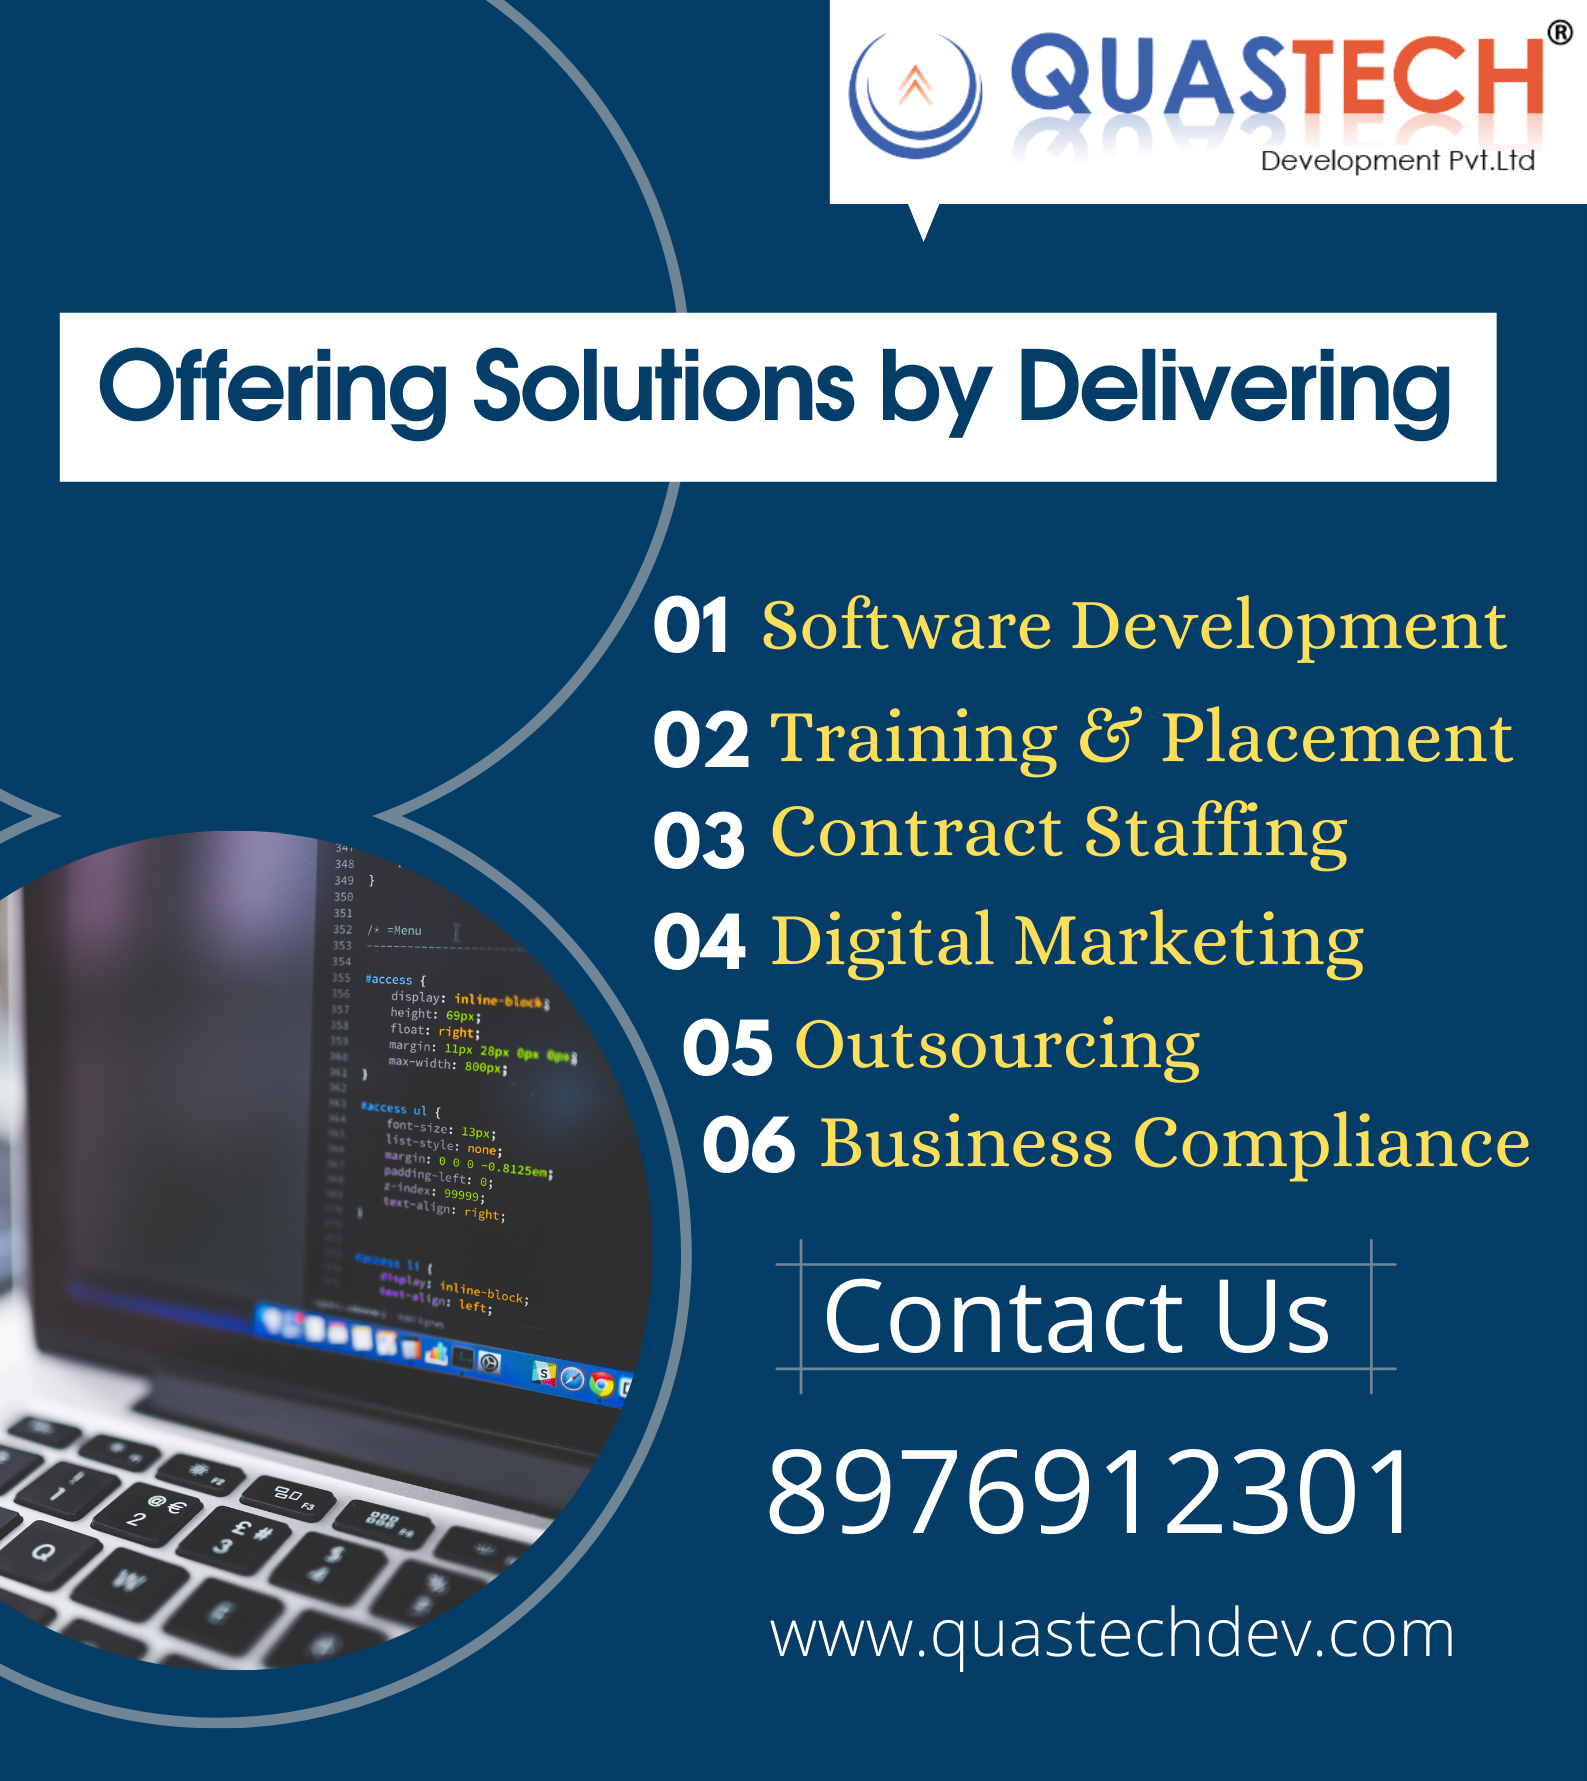 Software Development Services in Mumbai | Quastech Development Pvt LtdServicesEverything ElseAll Indiaother